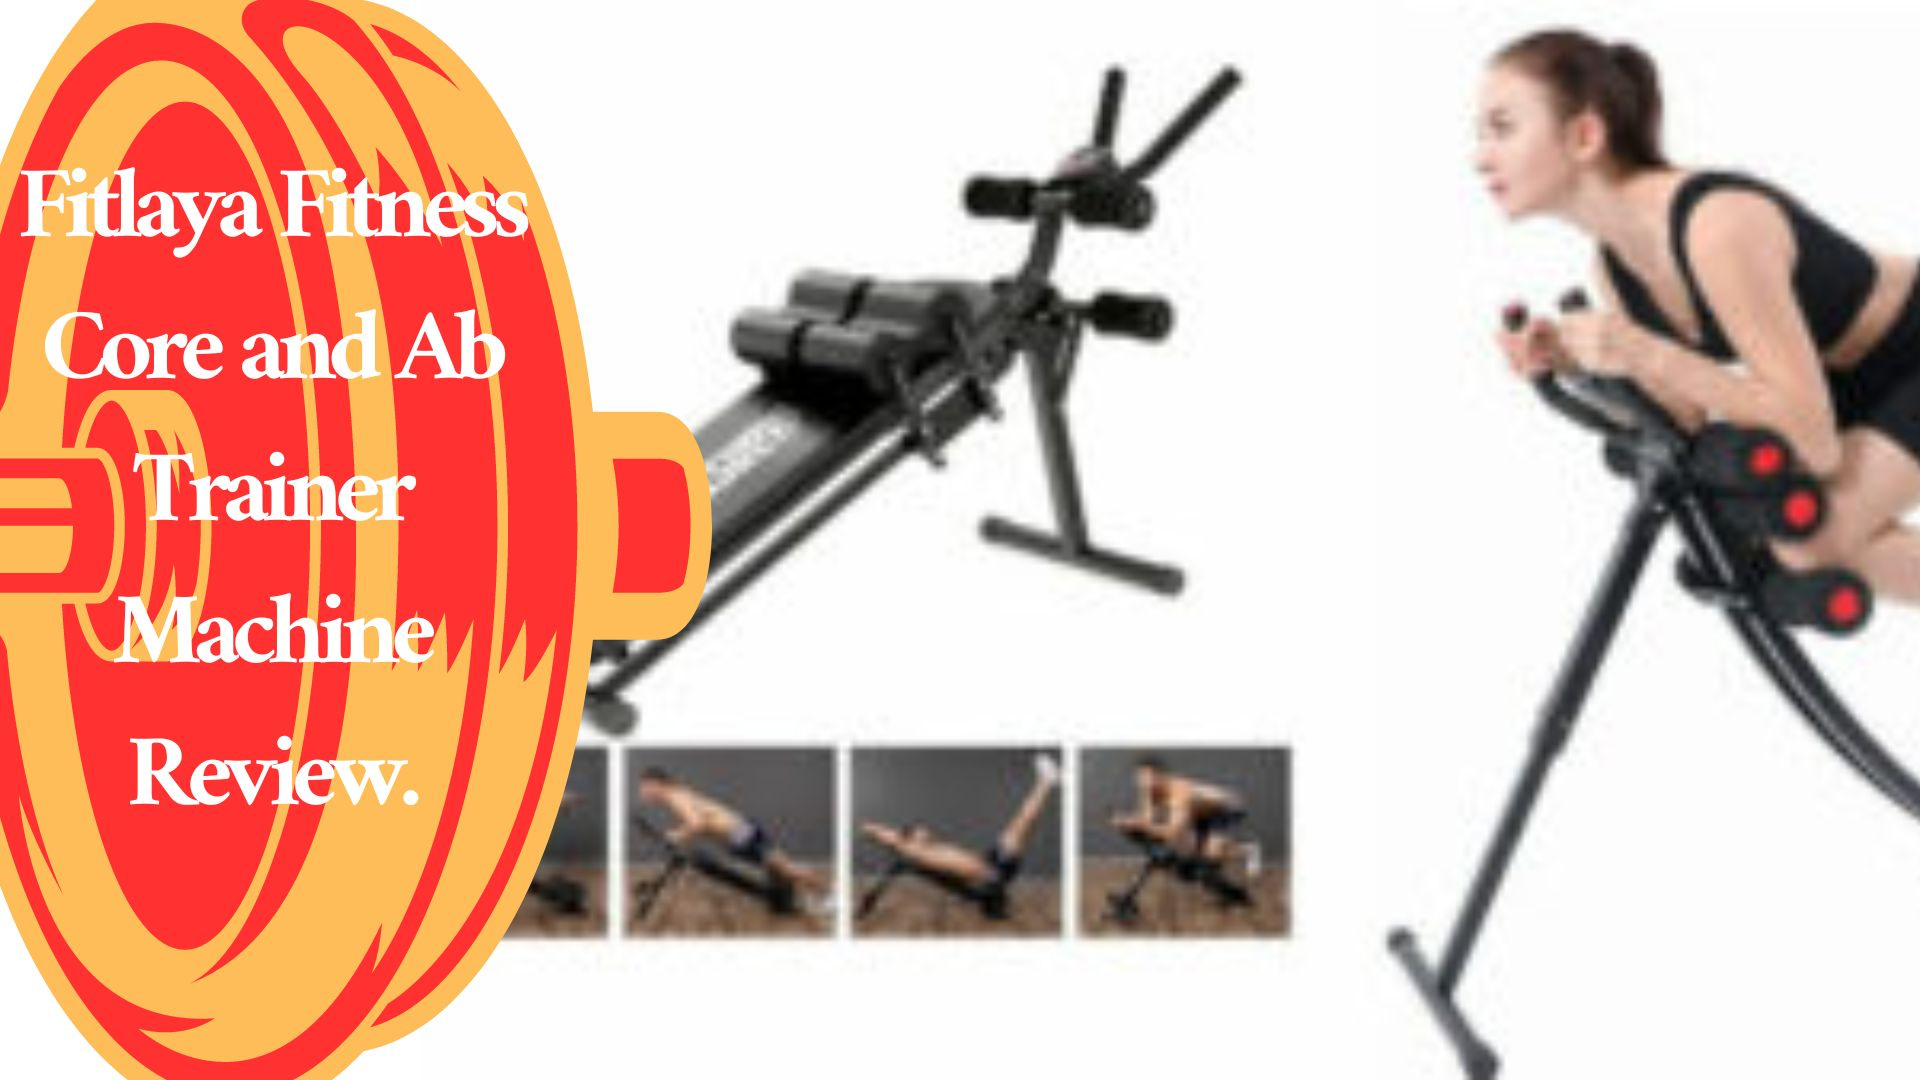 Fitlaya Fitness Core and Ab Trainer Machine Review.